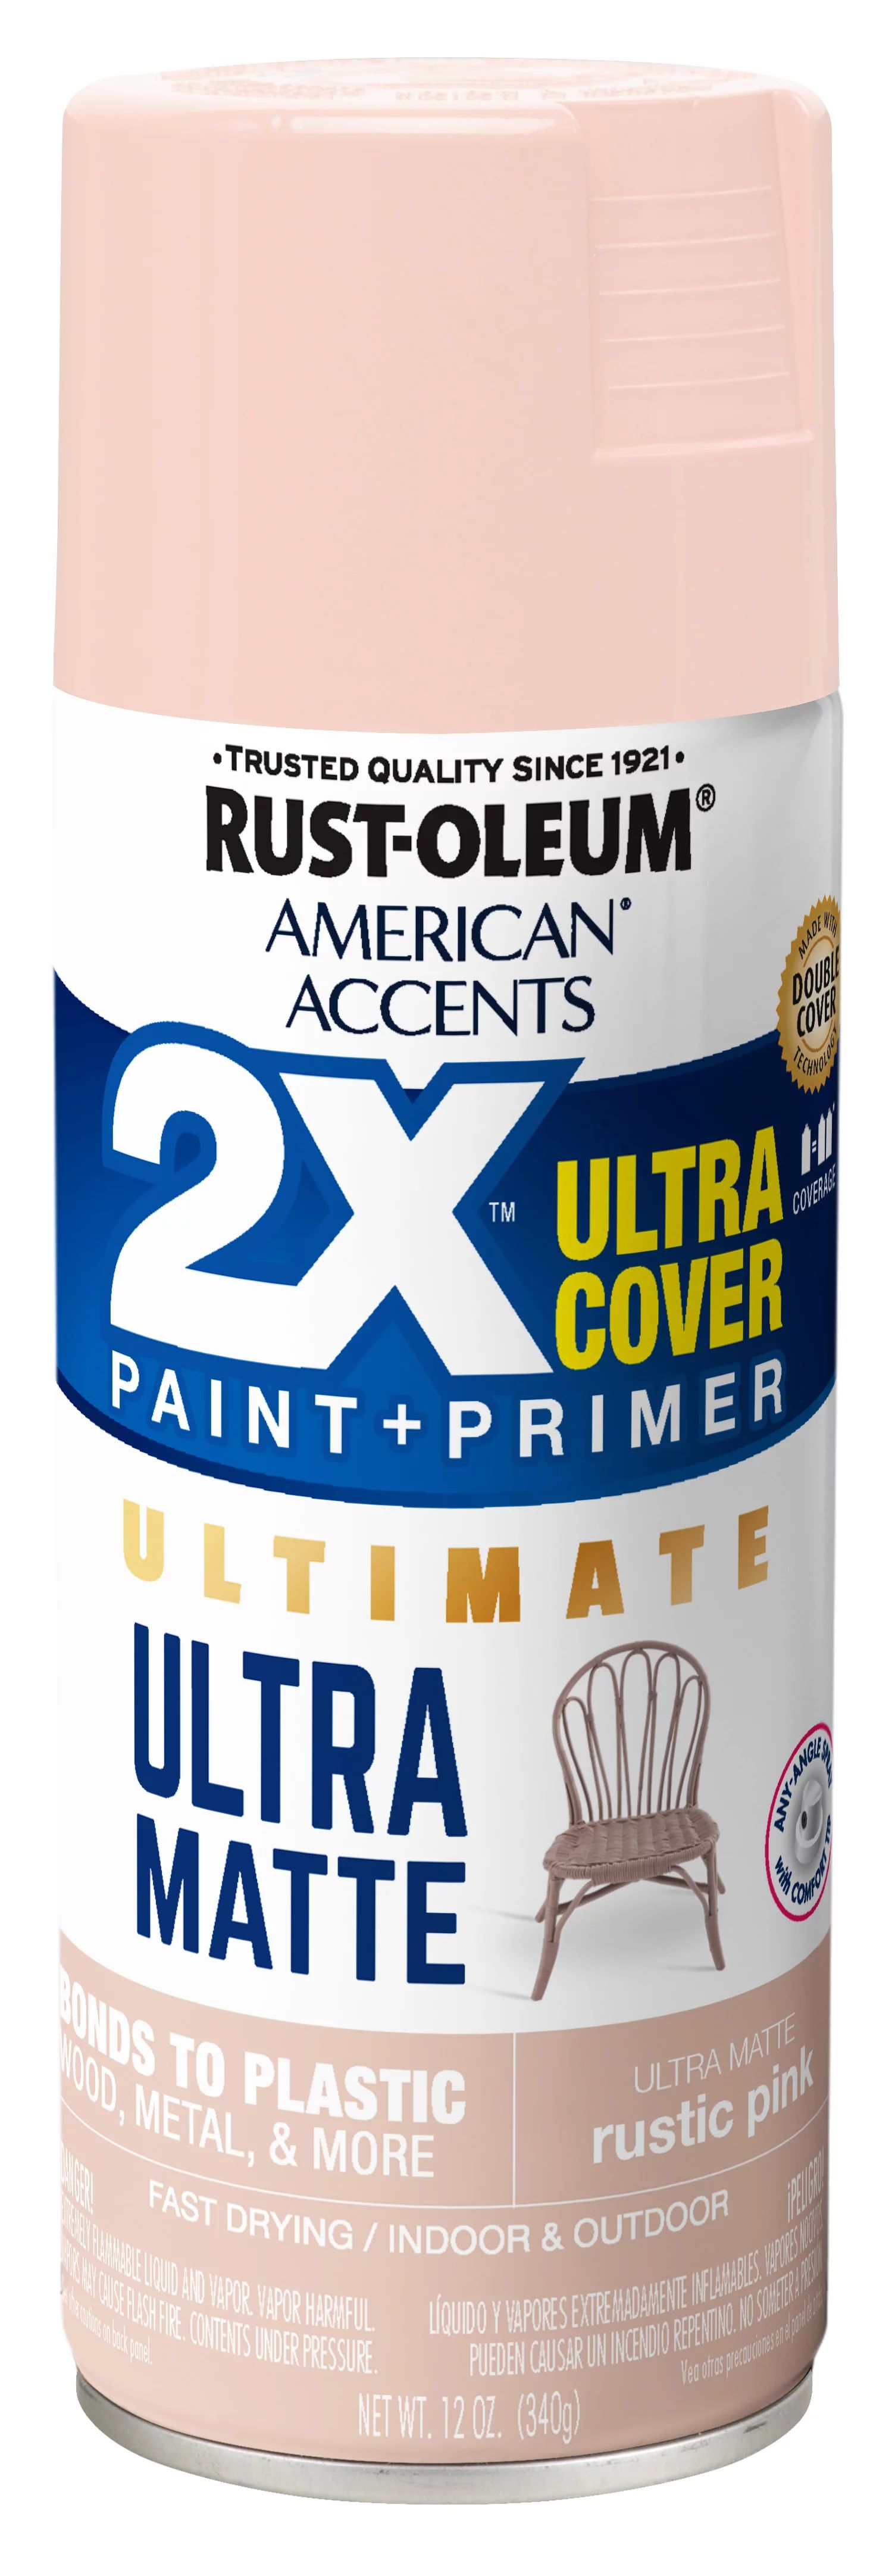 Rust-Oleum Rustic Pink American Accents 2X Ultra Cover Ultra Matte Spray Paint, 12 oz | Walmart (US)